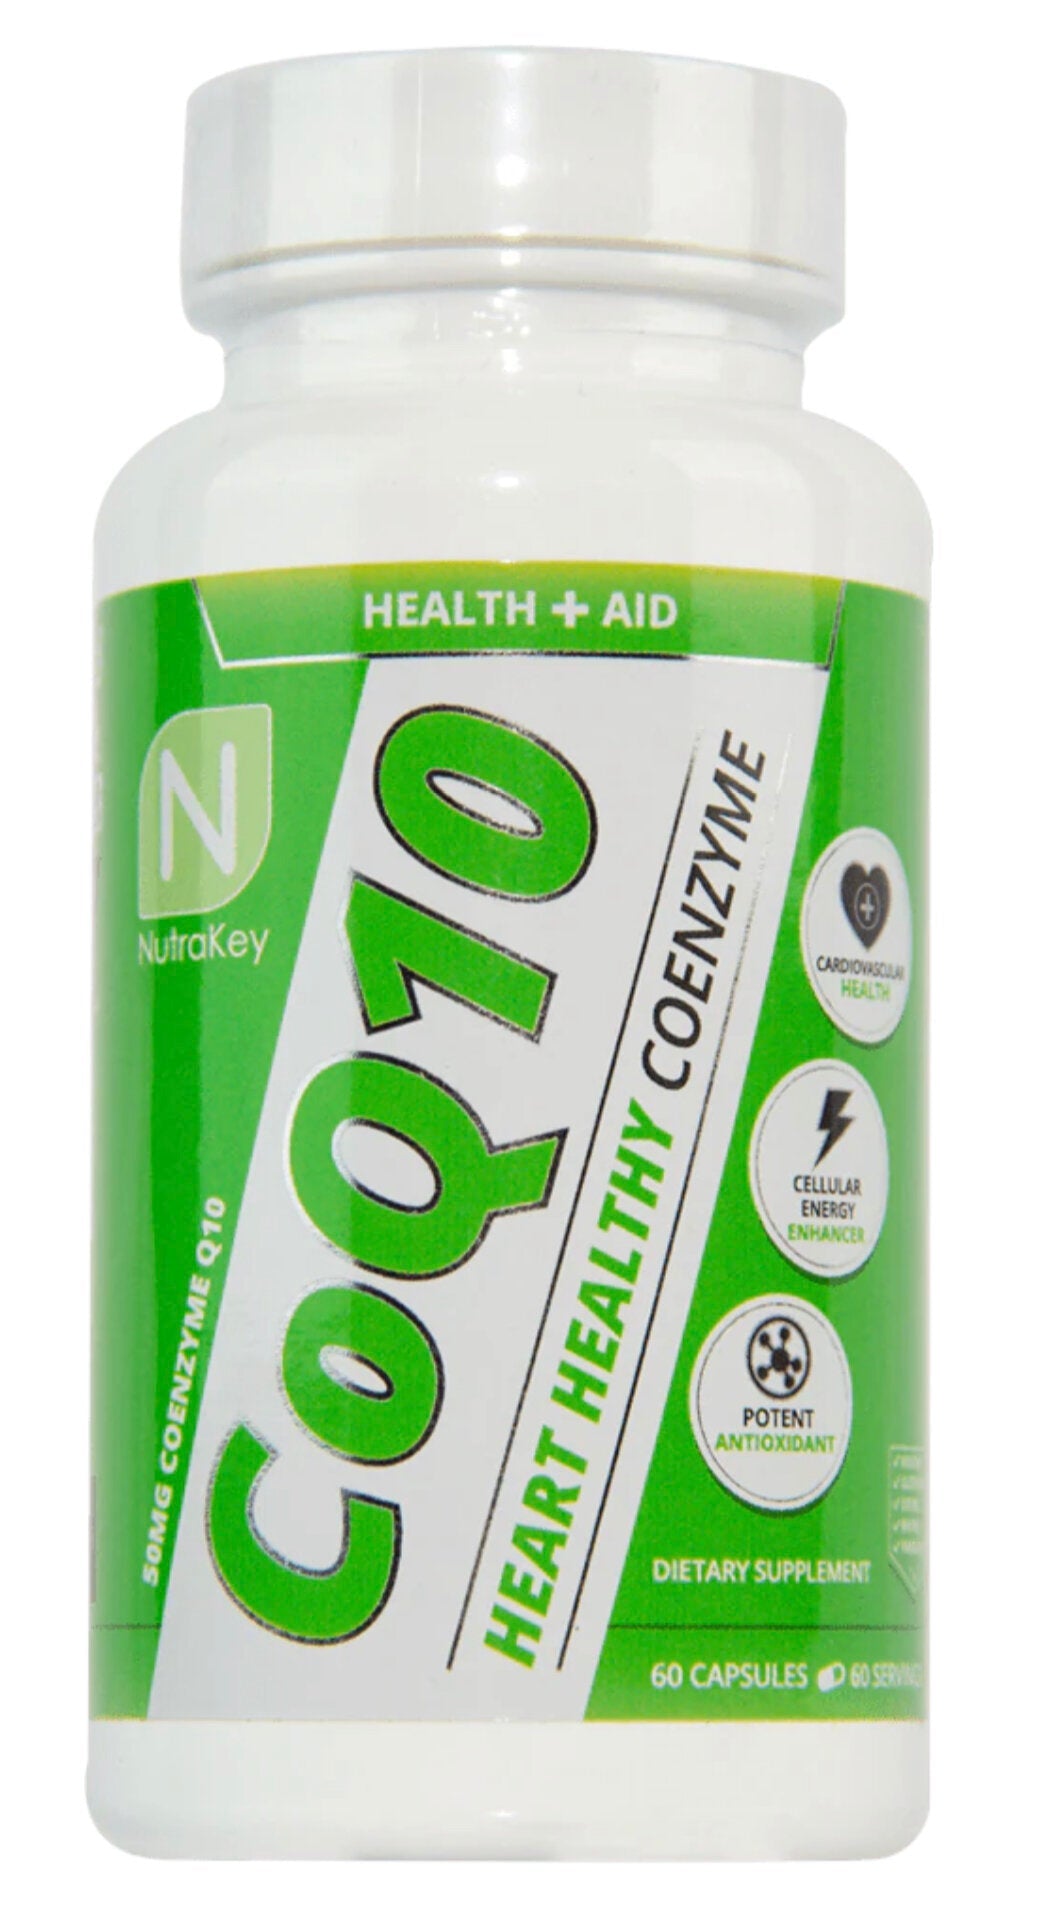 NutraKey-CoQ10-Heart Healthy Coenzyme 60 Capsules - Krazy Muscle Nutrition vendor-unknownSQ9649962